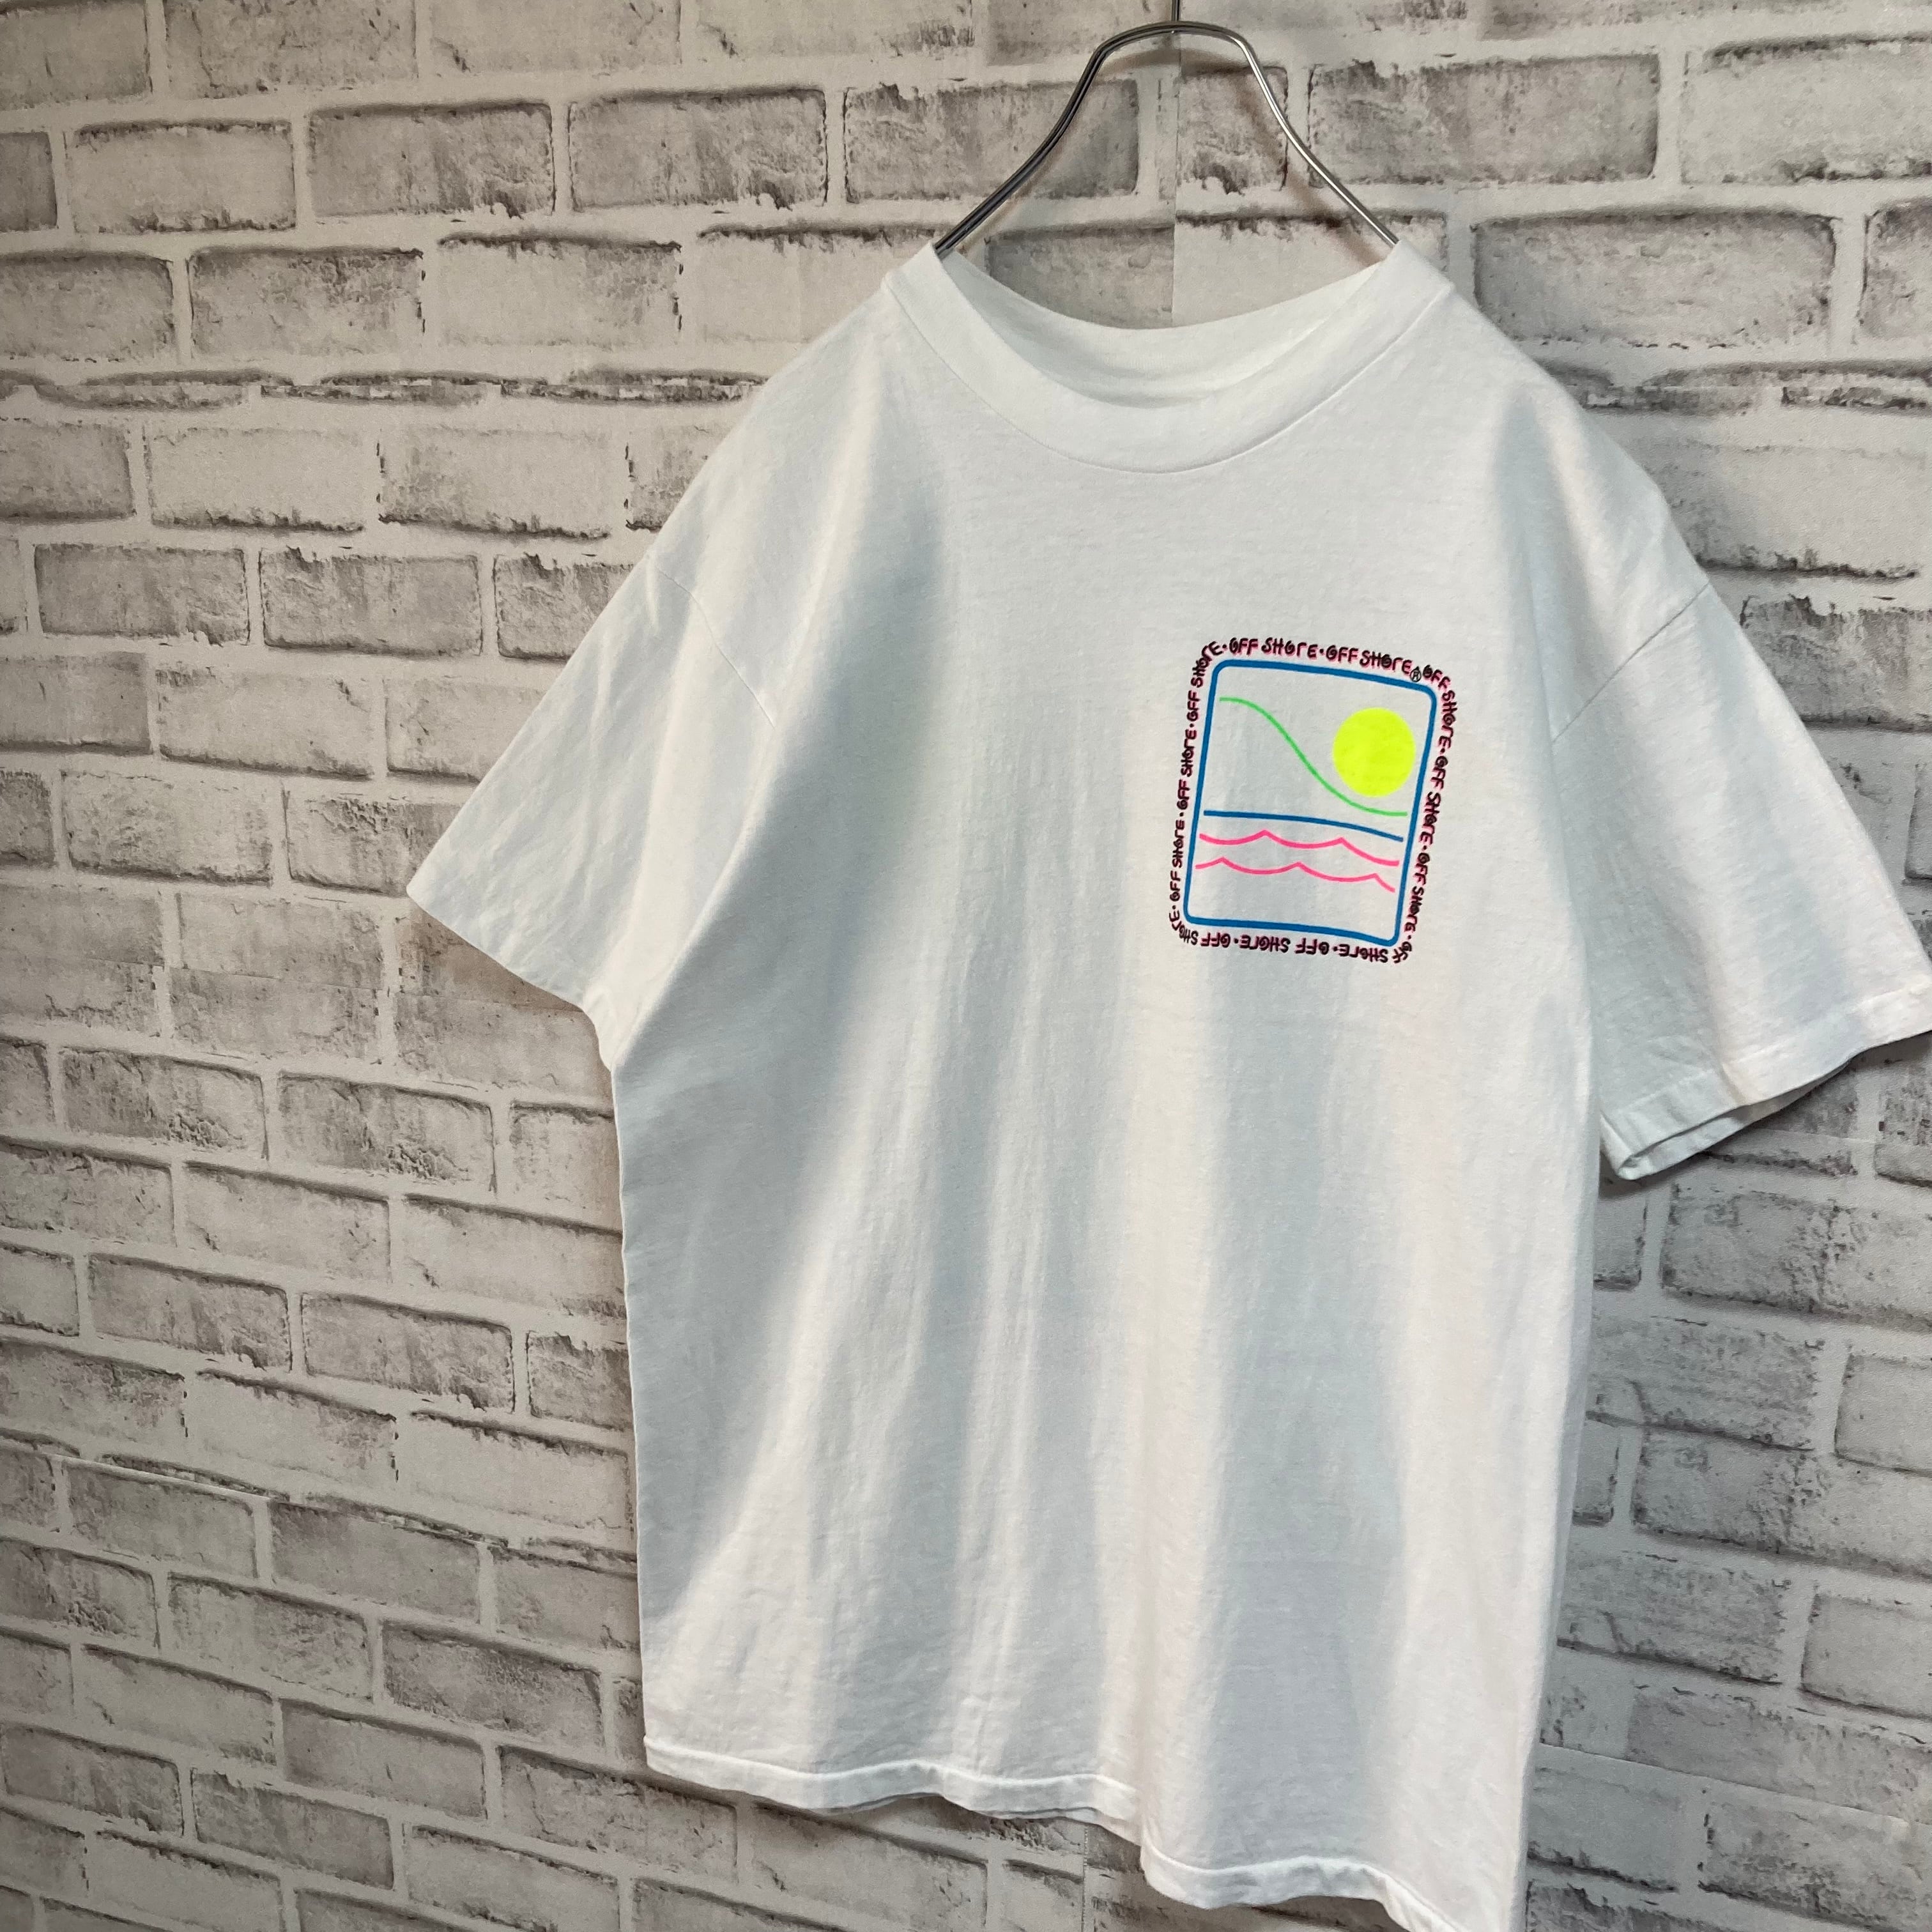 【Hanes】S/S Tee L Made in USA 80s vintage ヘインズ バック